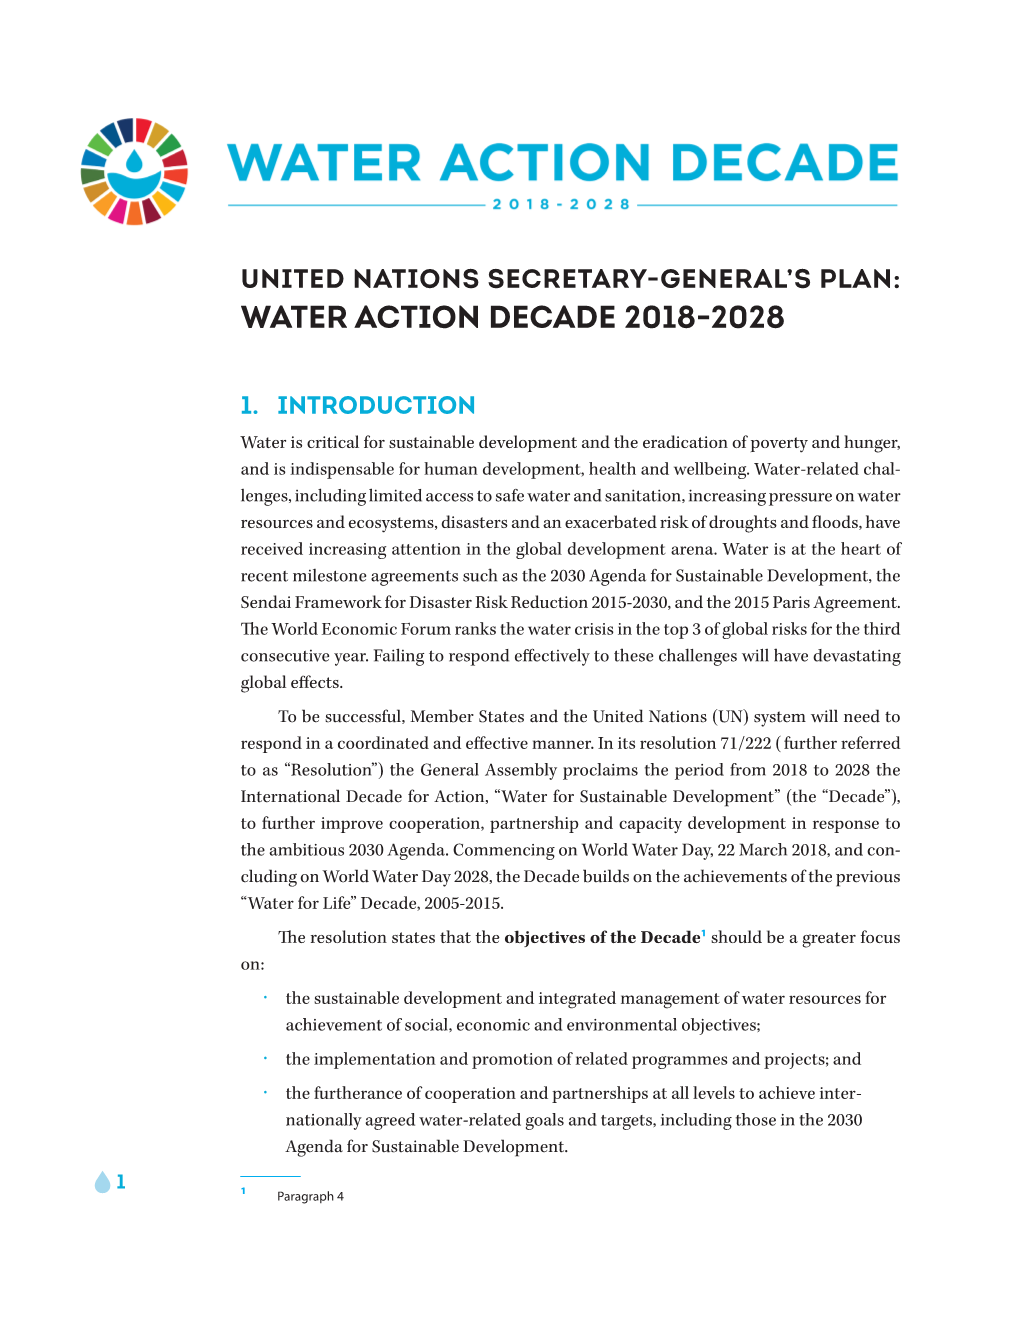 Water Action Decade 2018-2028